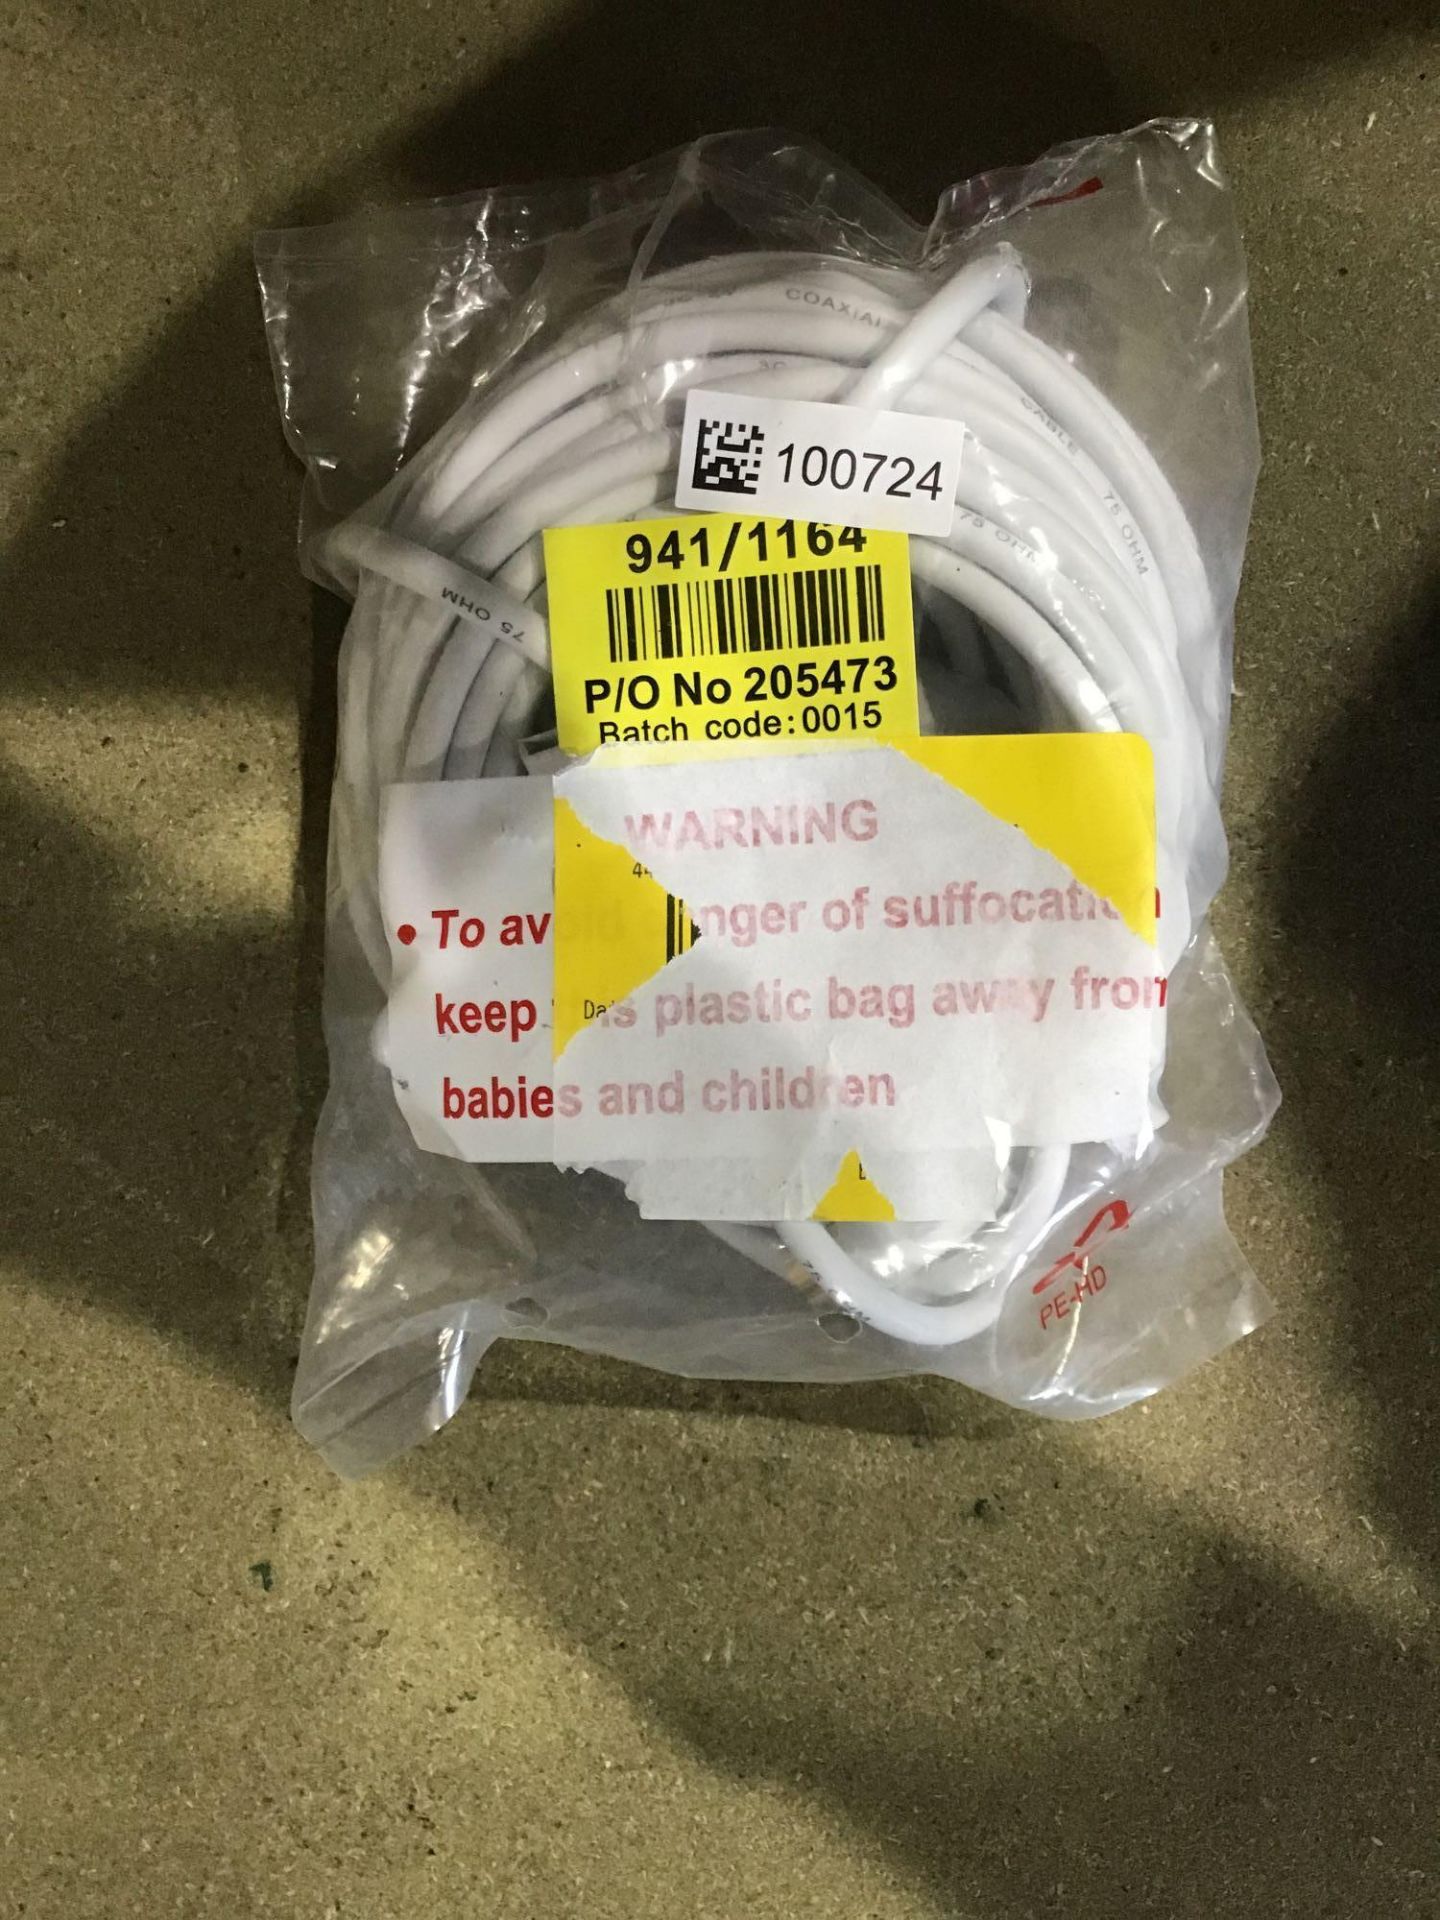 10m Aerial Extension Lead - White 941/1164 £9.00 RRP - Image 3 of 4